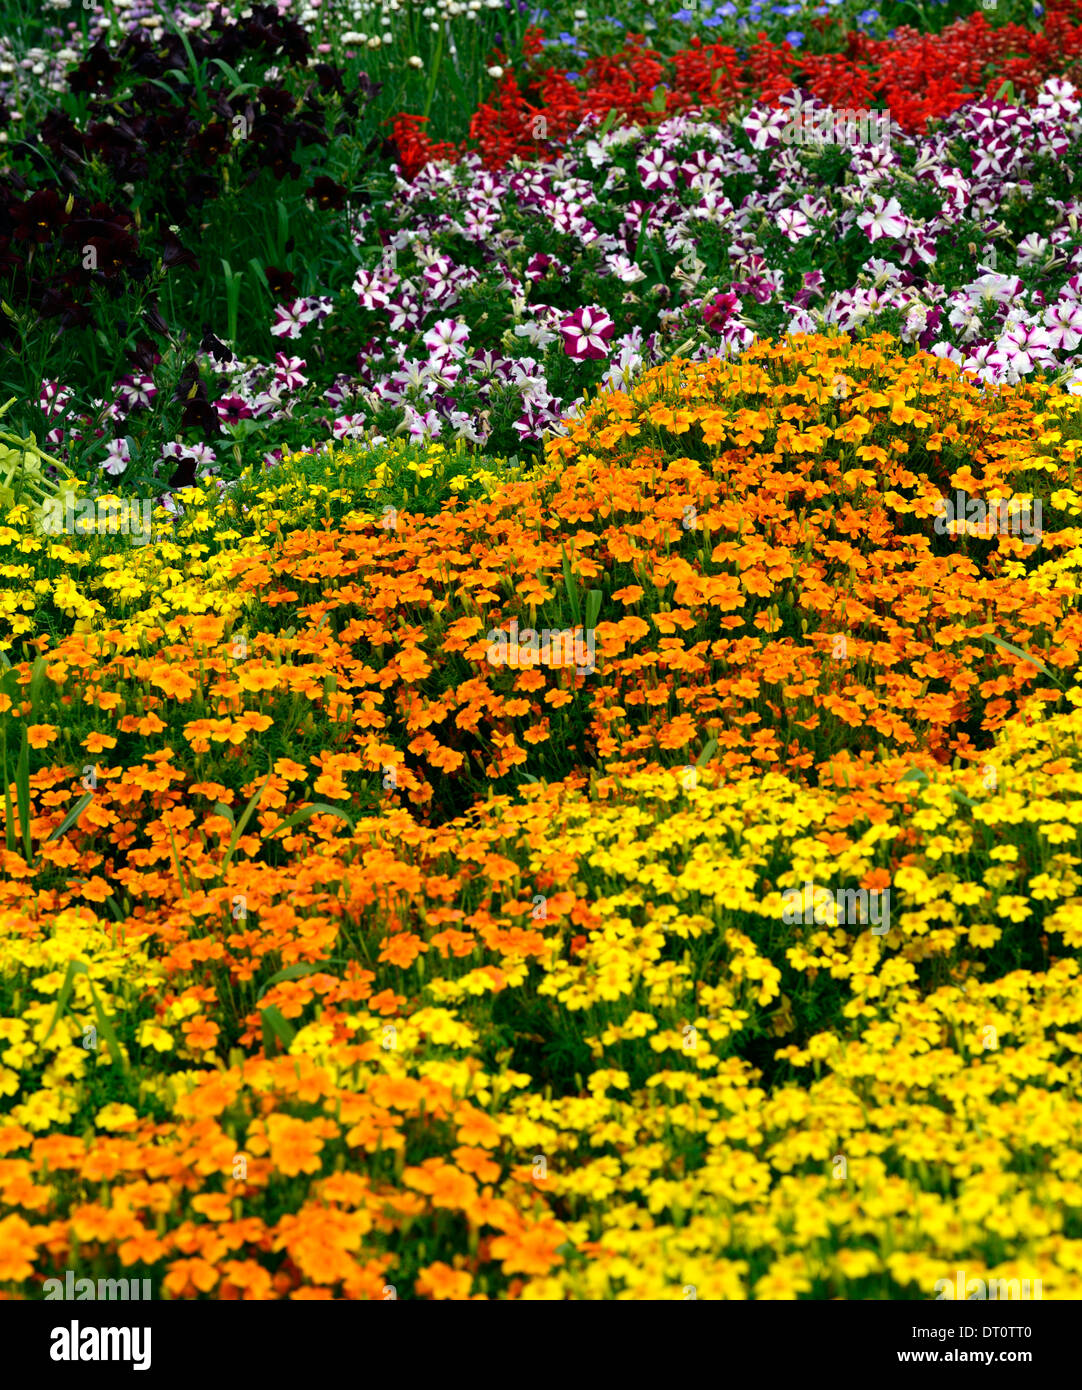 tagetes golden gem tagetes tangerine gem mix mixed flower bed border borders bedding display annuals annual flower flowers plant Stock Photo